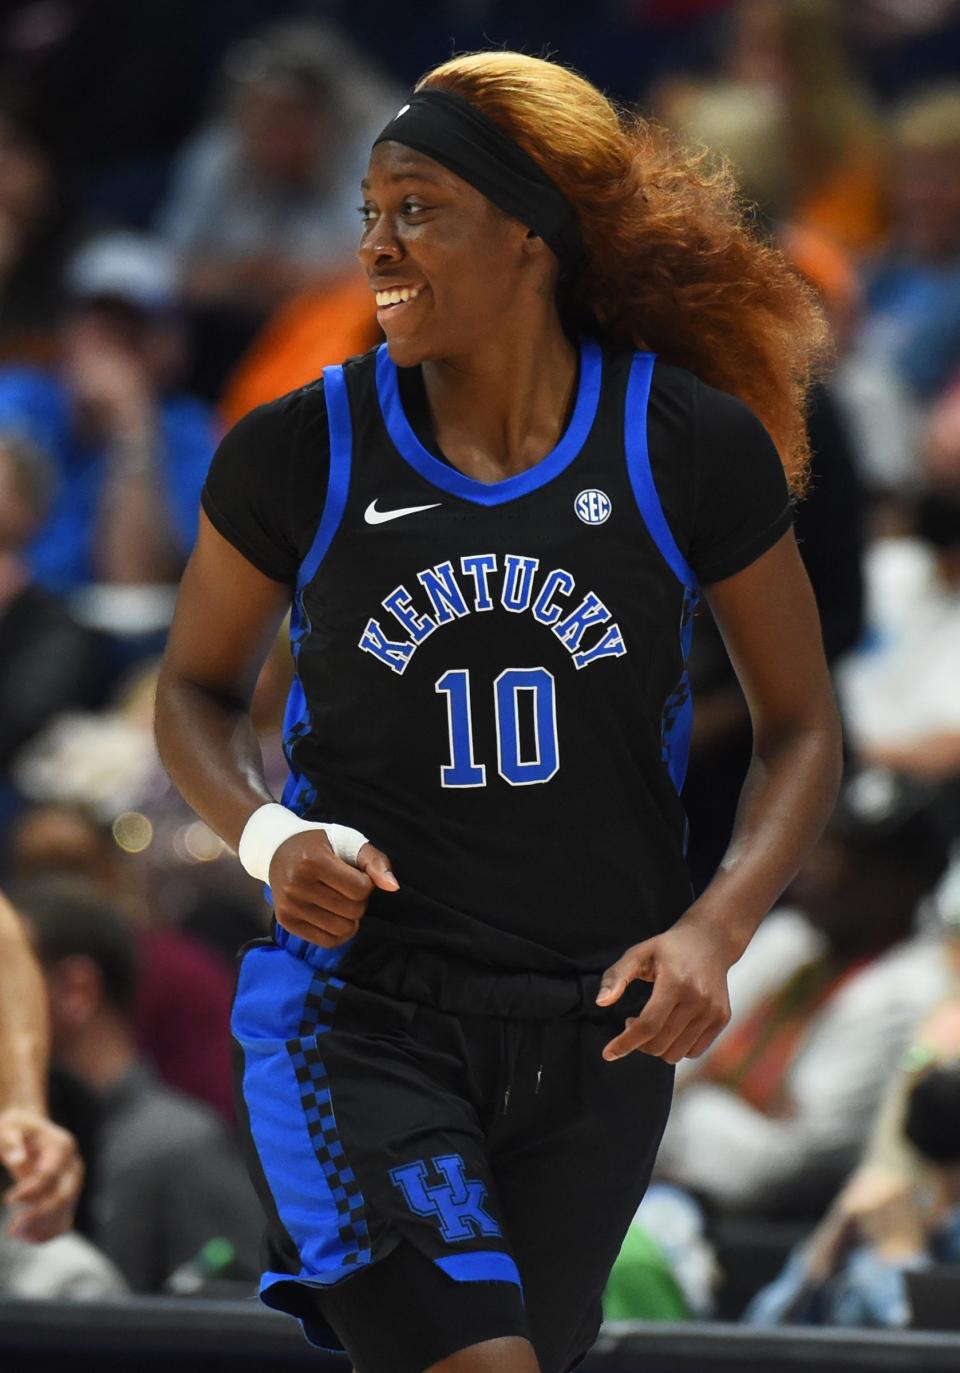 Mar 4, 2022; Nashville, TN, USA; Kentucky Wildcats guard Rhyne Howard (10) reacts after a basket during the first half against the LSU Lady Tigers at Bridgestone Arena. Mandatory Credit: Christopher Hanewinckel-USA TODAY Sports